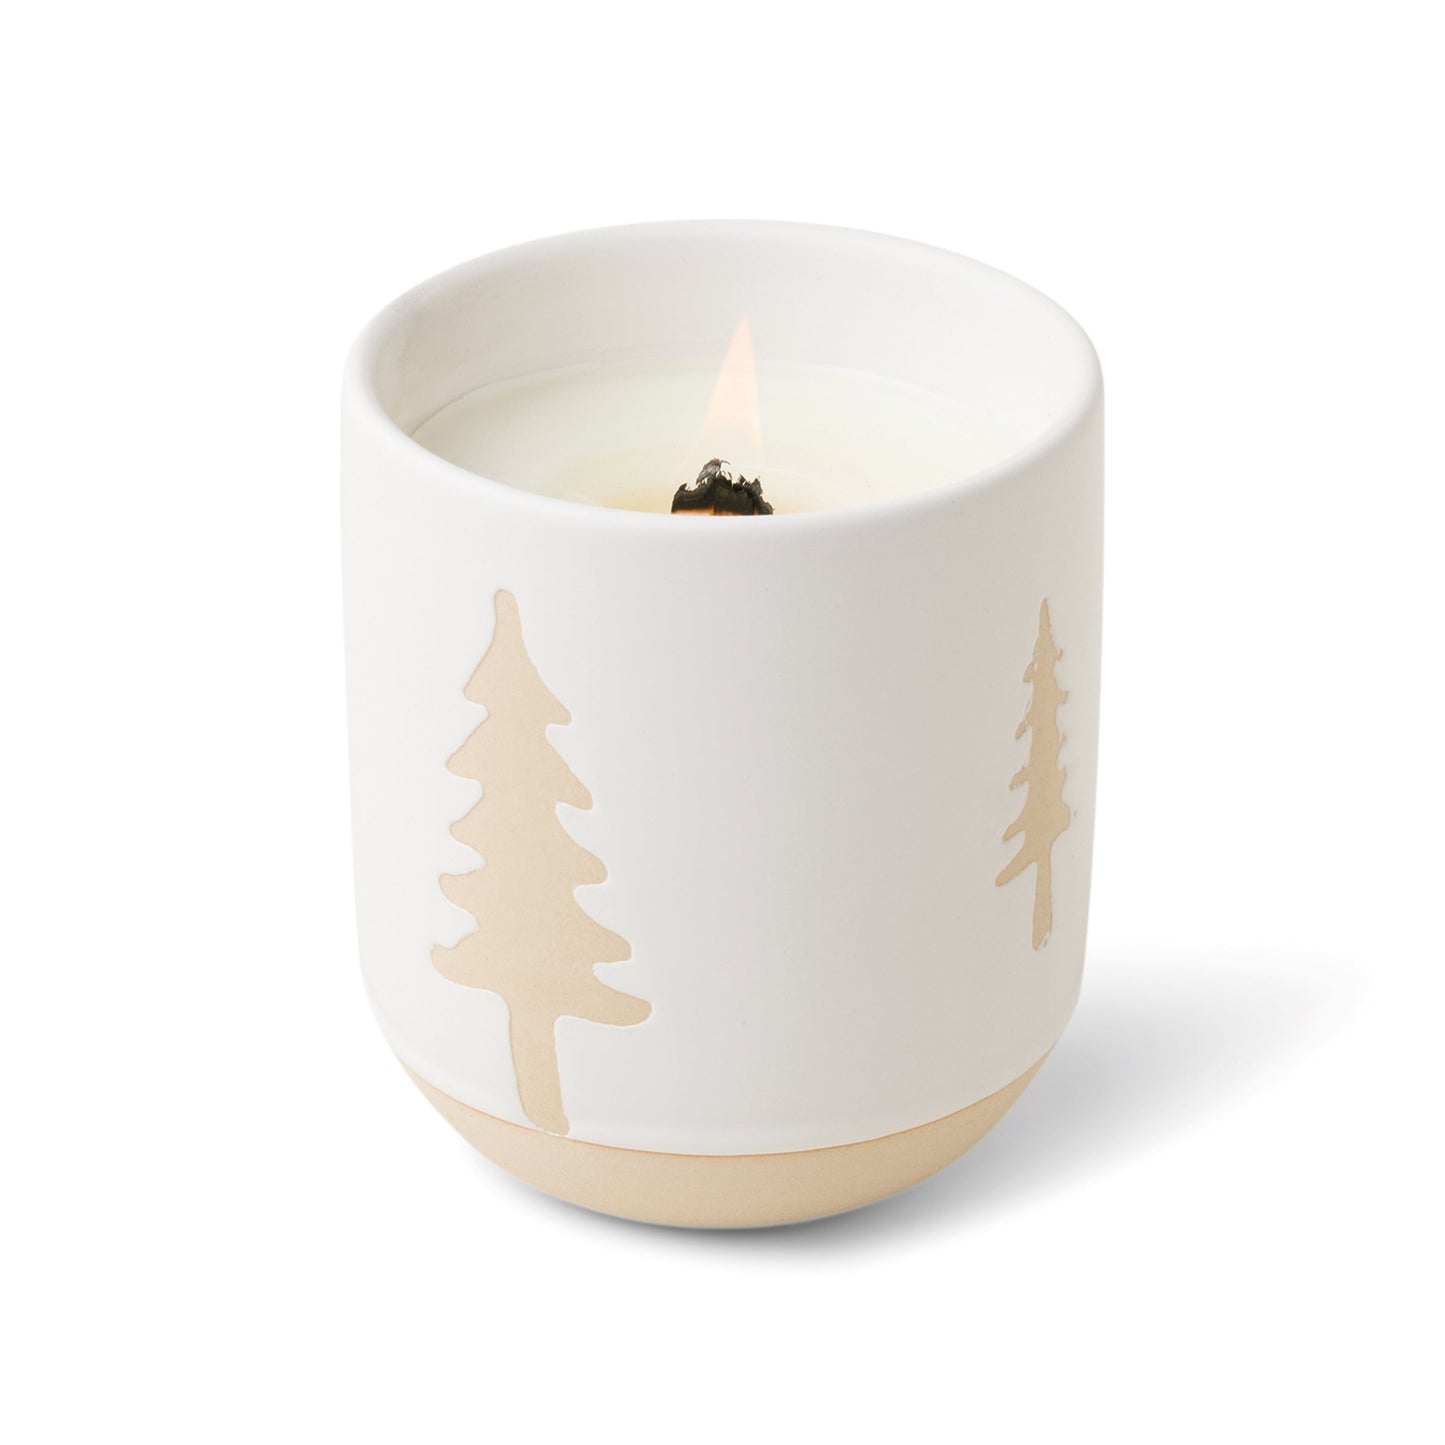 Cypress & Fir 240g White Glaze with Raw Ceramic Tree Pattern and Wooden Wick